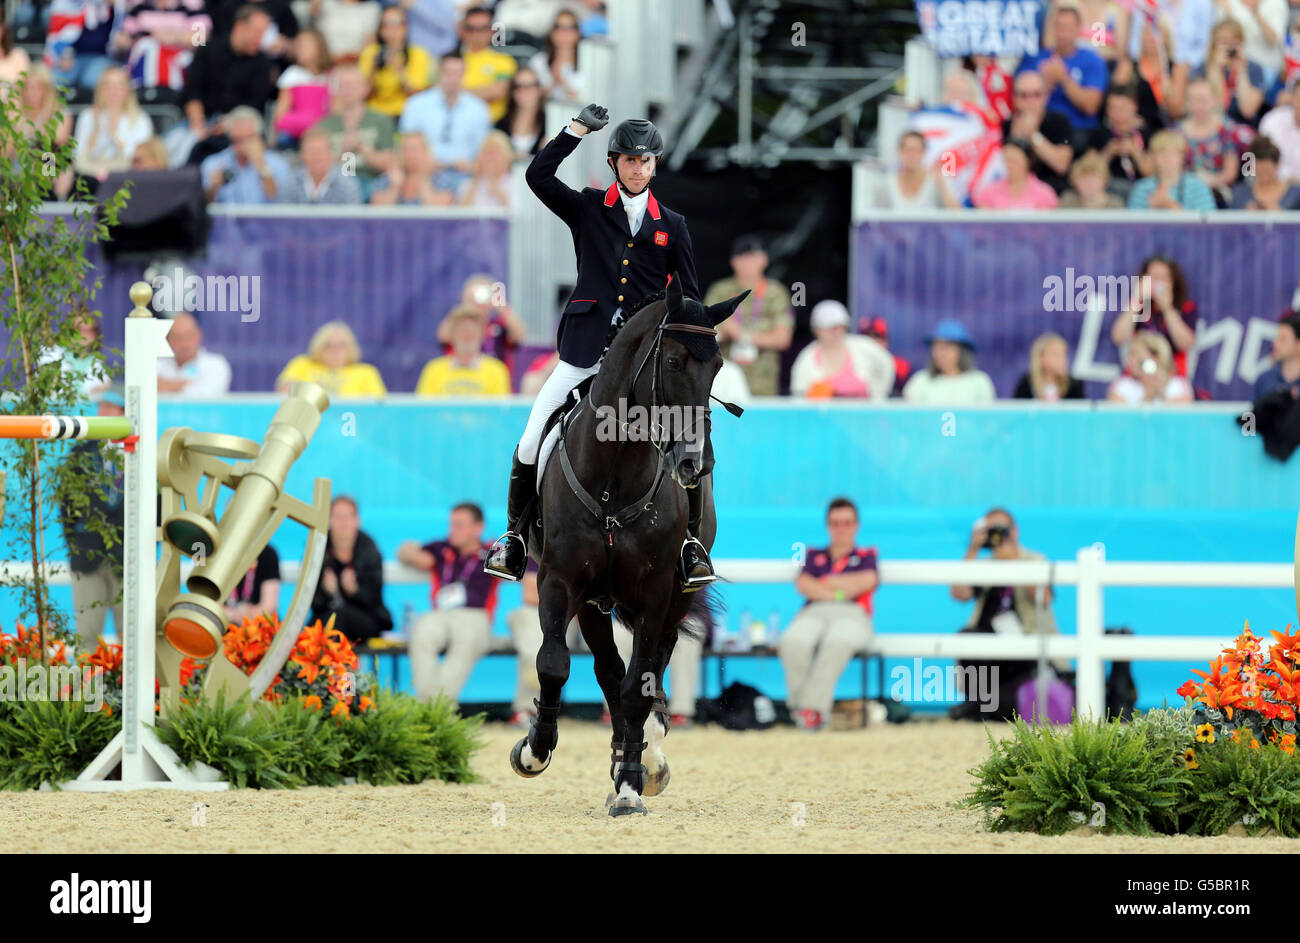 Great Britain's Ben Maher riding Tripple X in the Equestrian Jumping Individual Final Round B at Greenwich Park, on the twelfth day of the London 2012 Olympics. Stock Photo